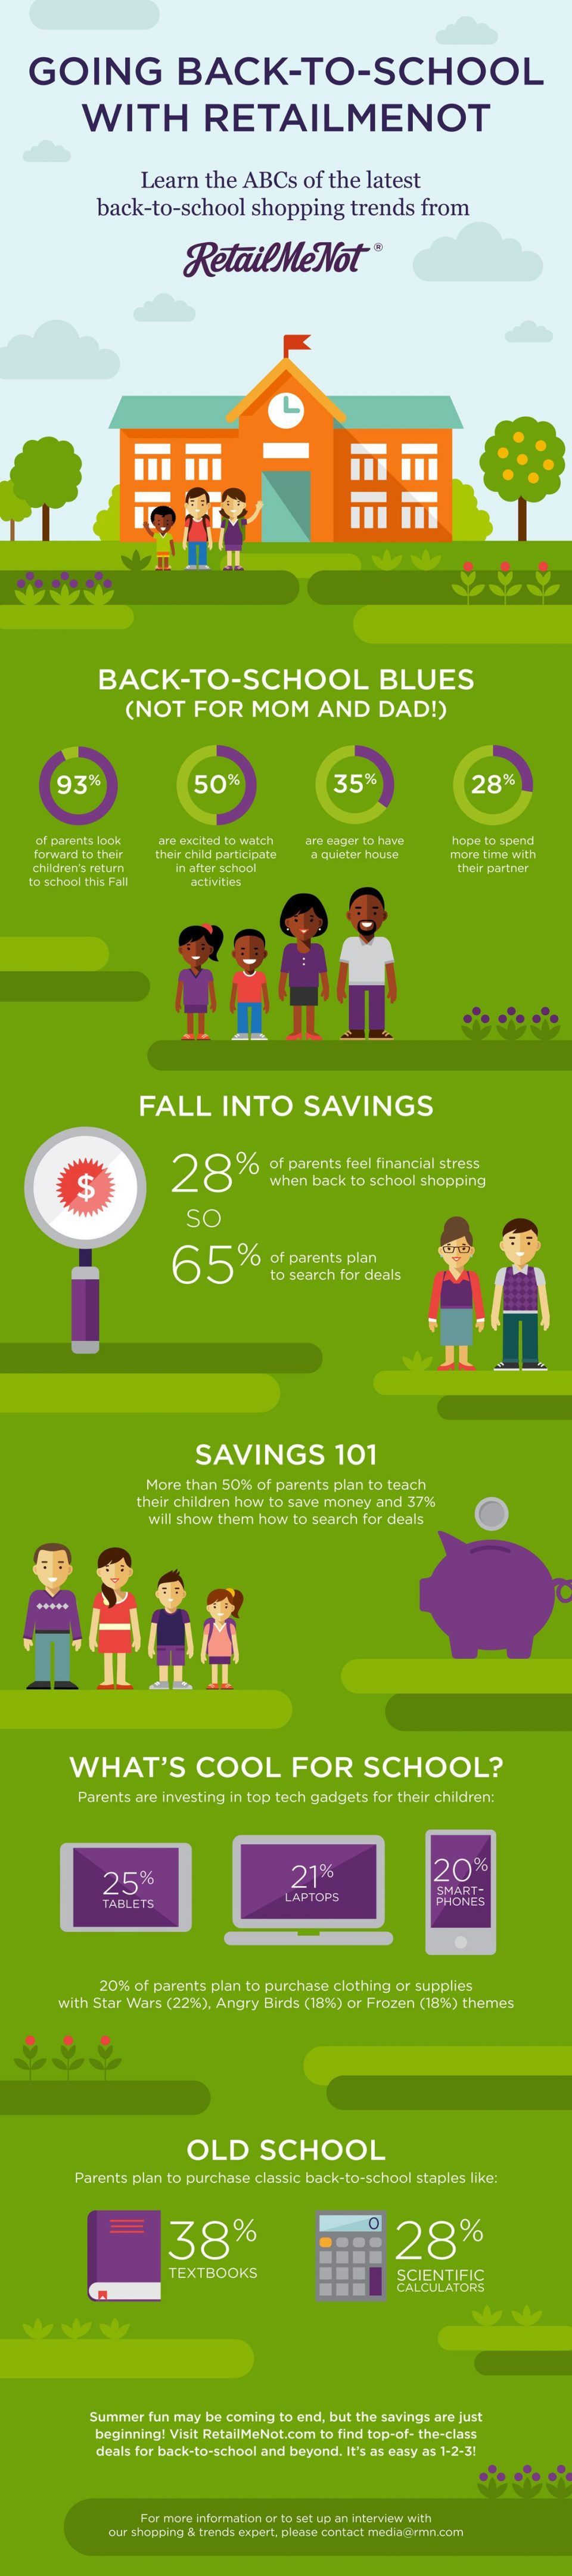 2016 Back to School Shopping Trends Infographic